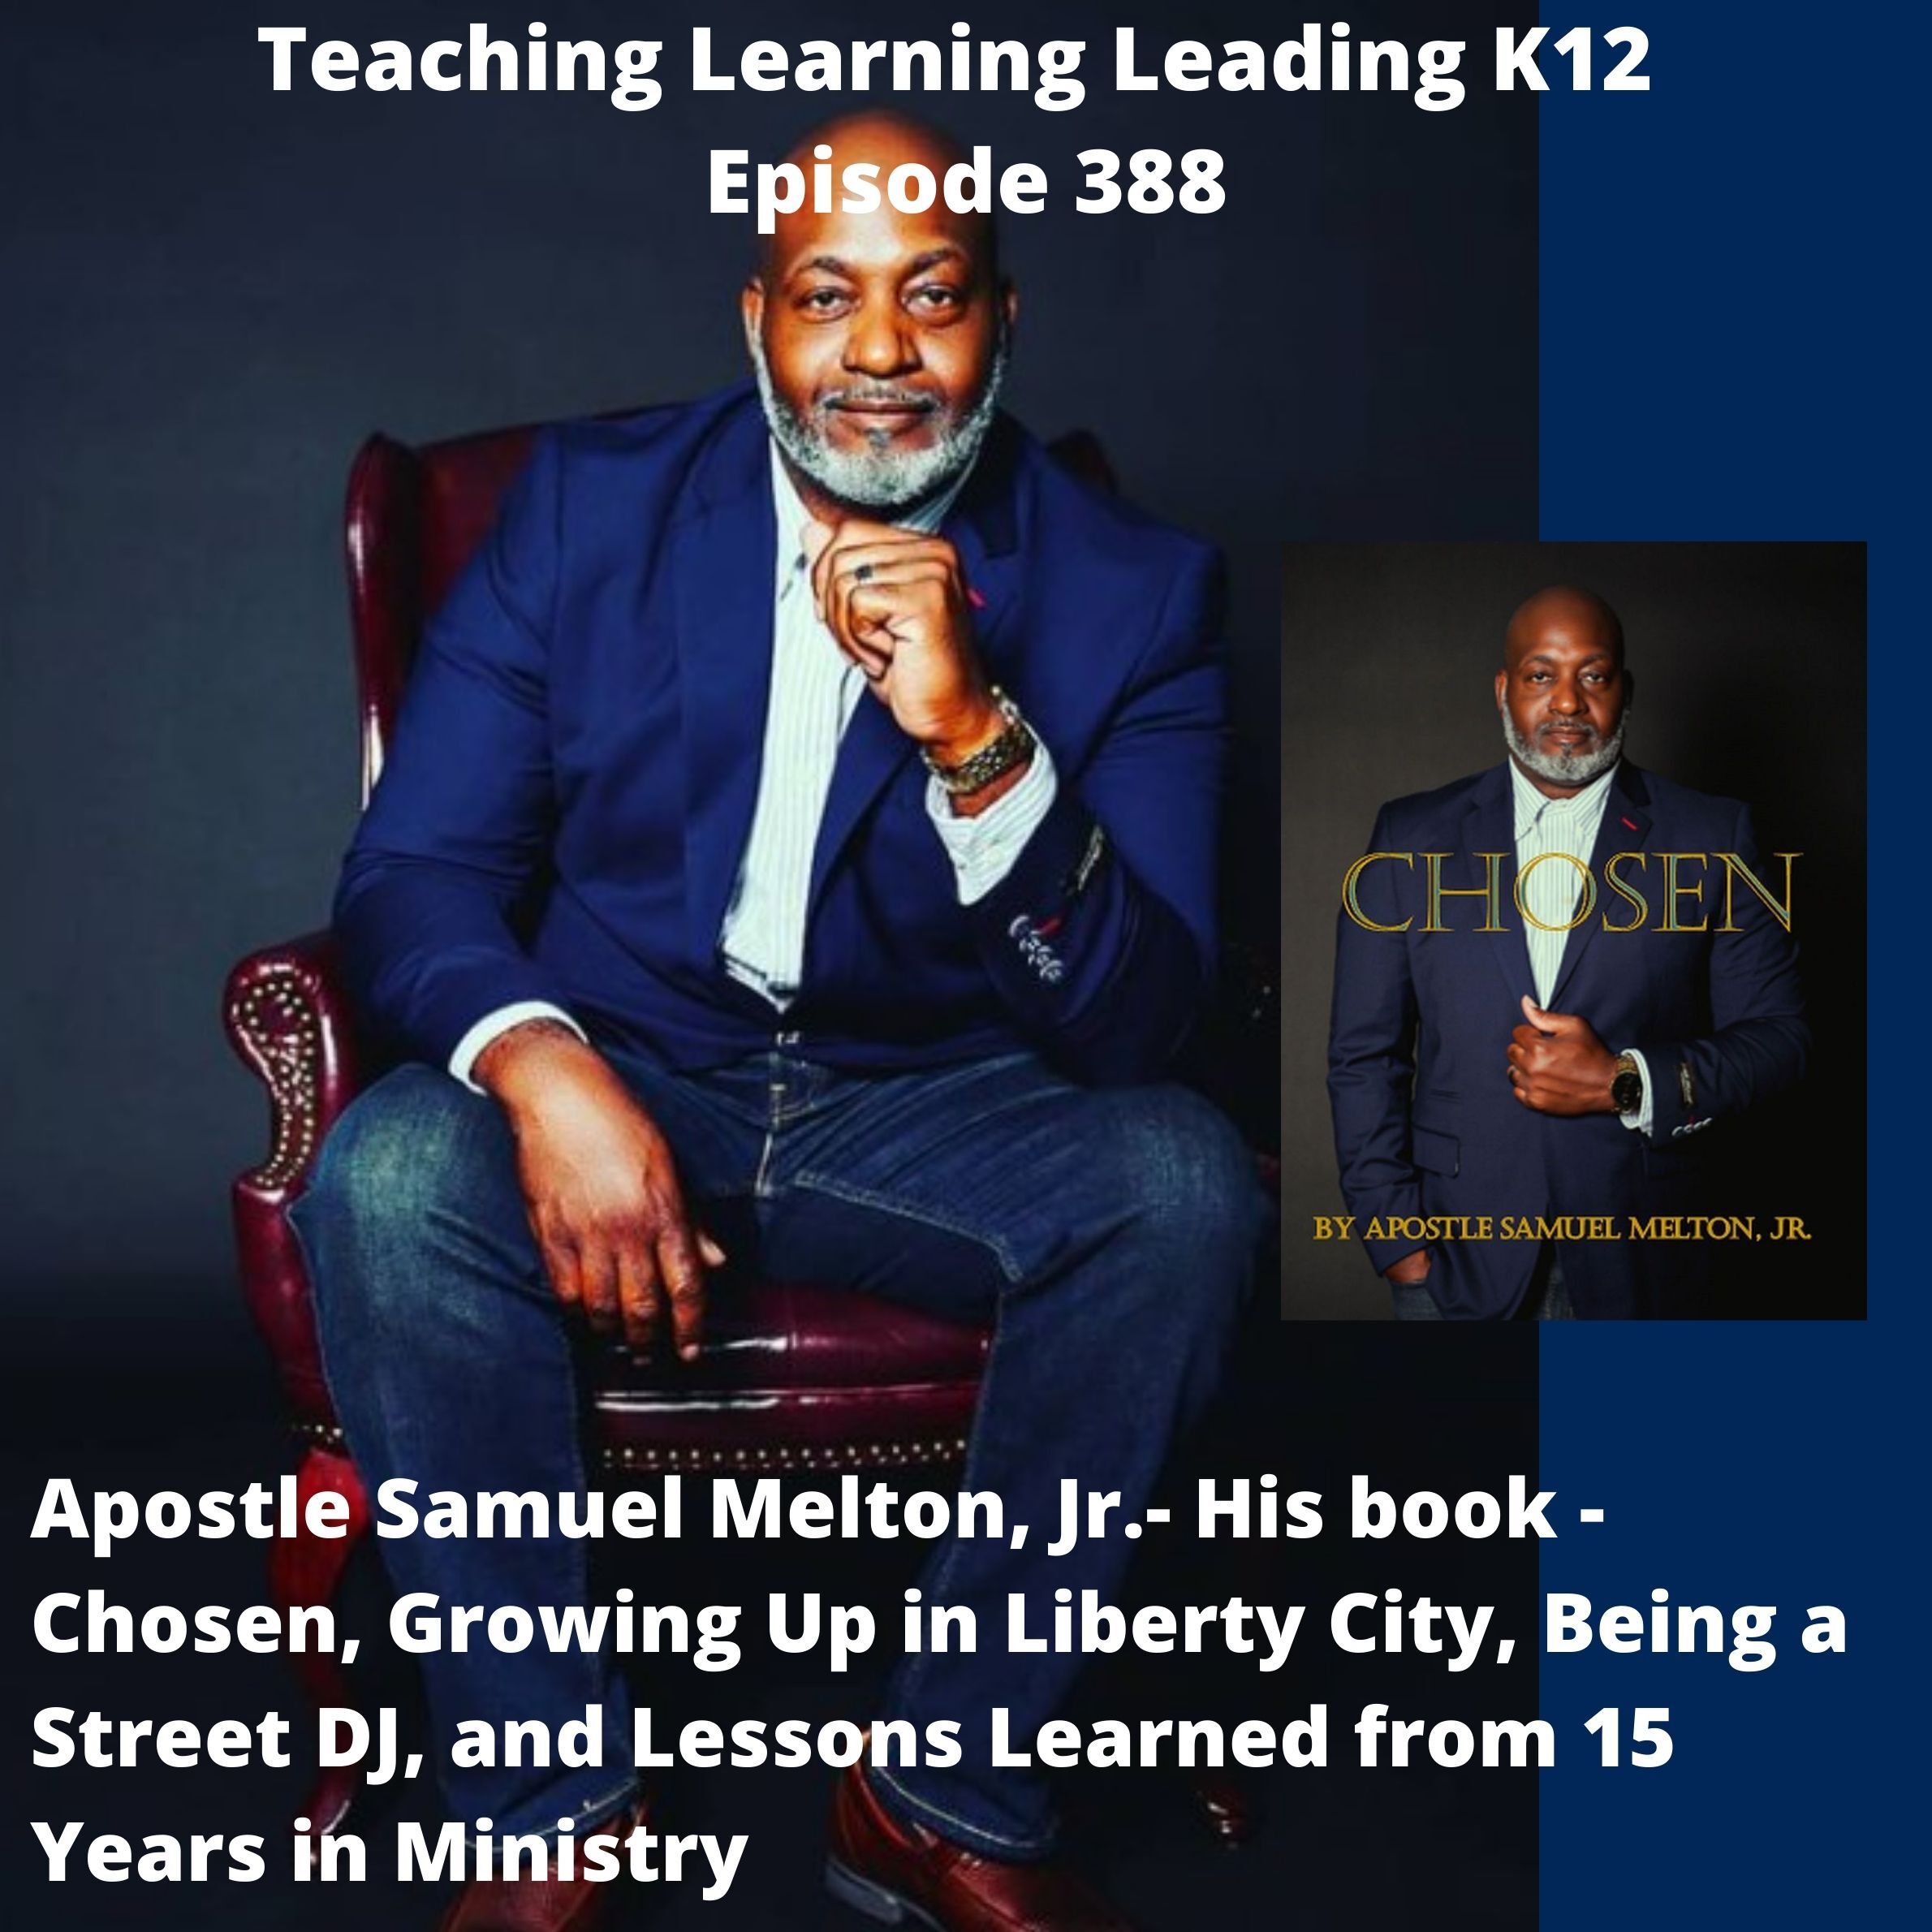 Samuel Melton, Jr: His book - Chosen, Growing up in Liberty City, Being a Street DJ, and Learned Lessons from 15 Years in the Ministry - 388